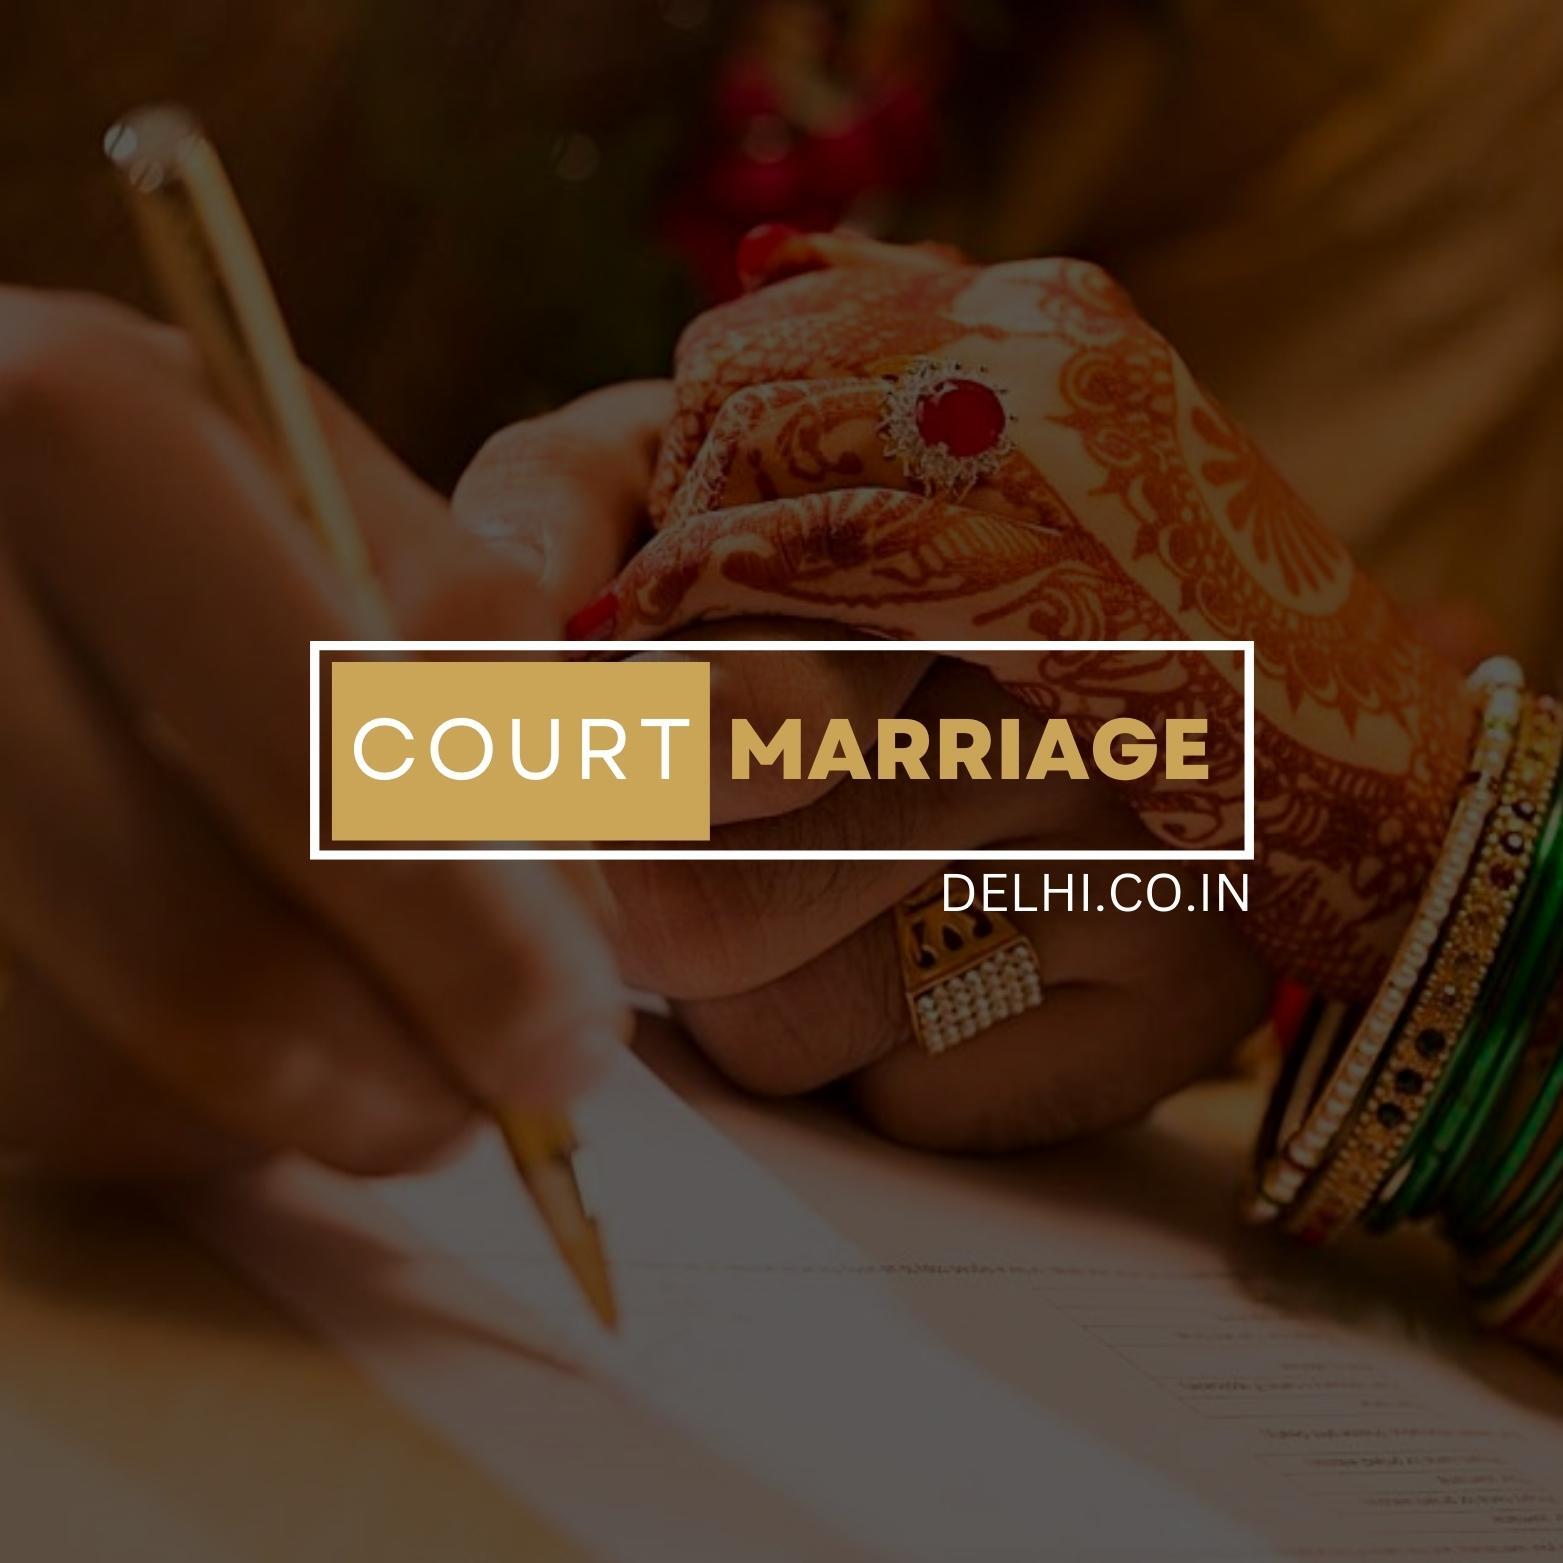 Special Marriage Service In DelhiServicesLawyers - AdvocatesSouth DelhiOther